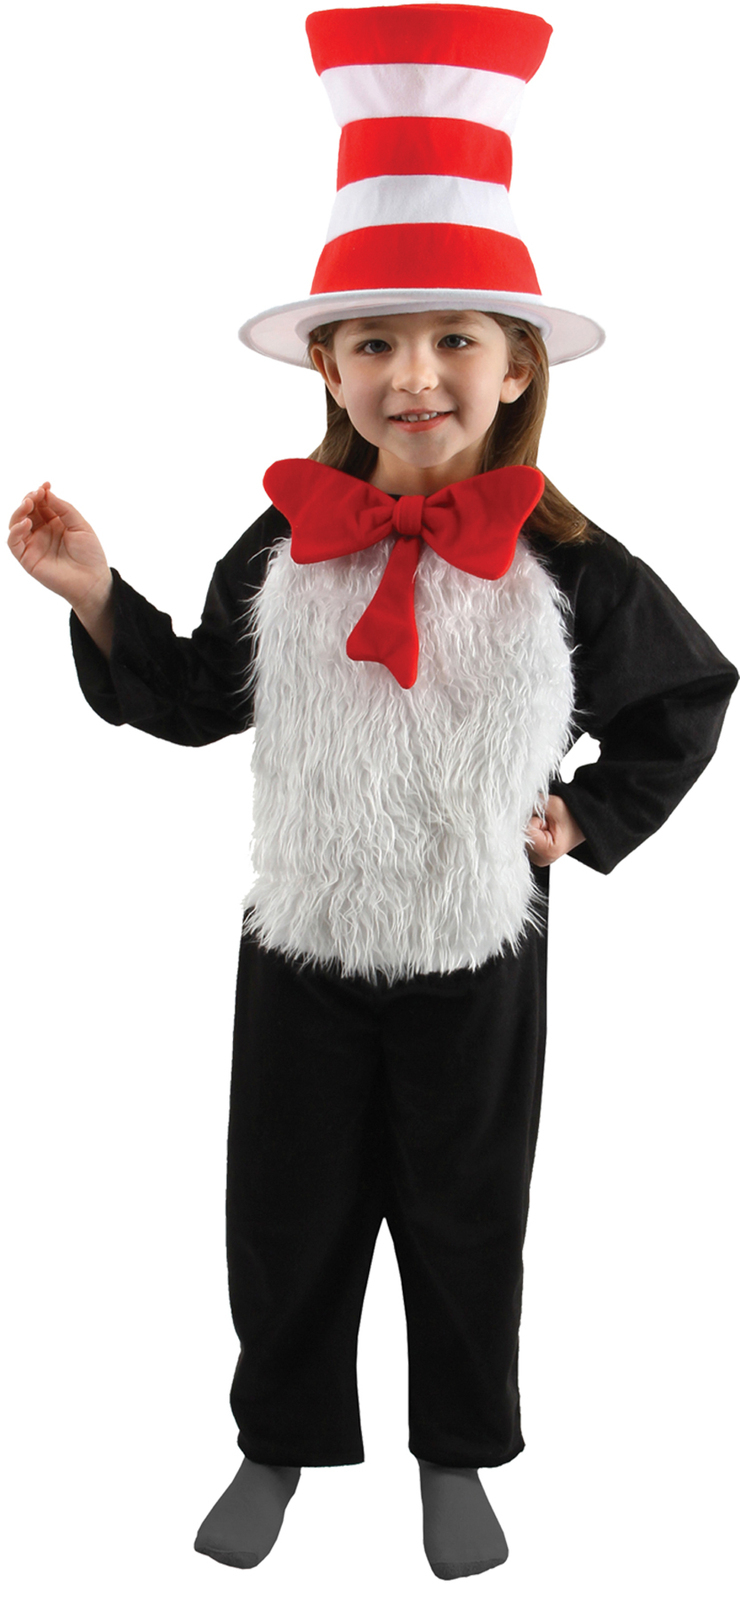 Primary image for Big Boys' Deluxe Child Cat in the Hat Costume - S